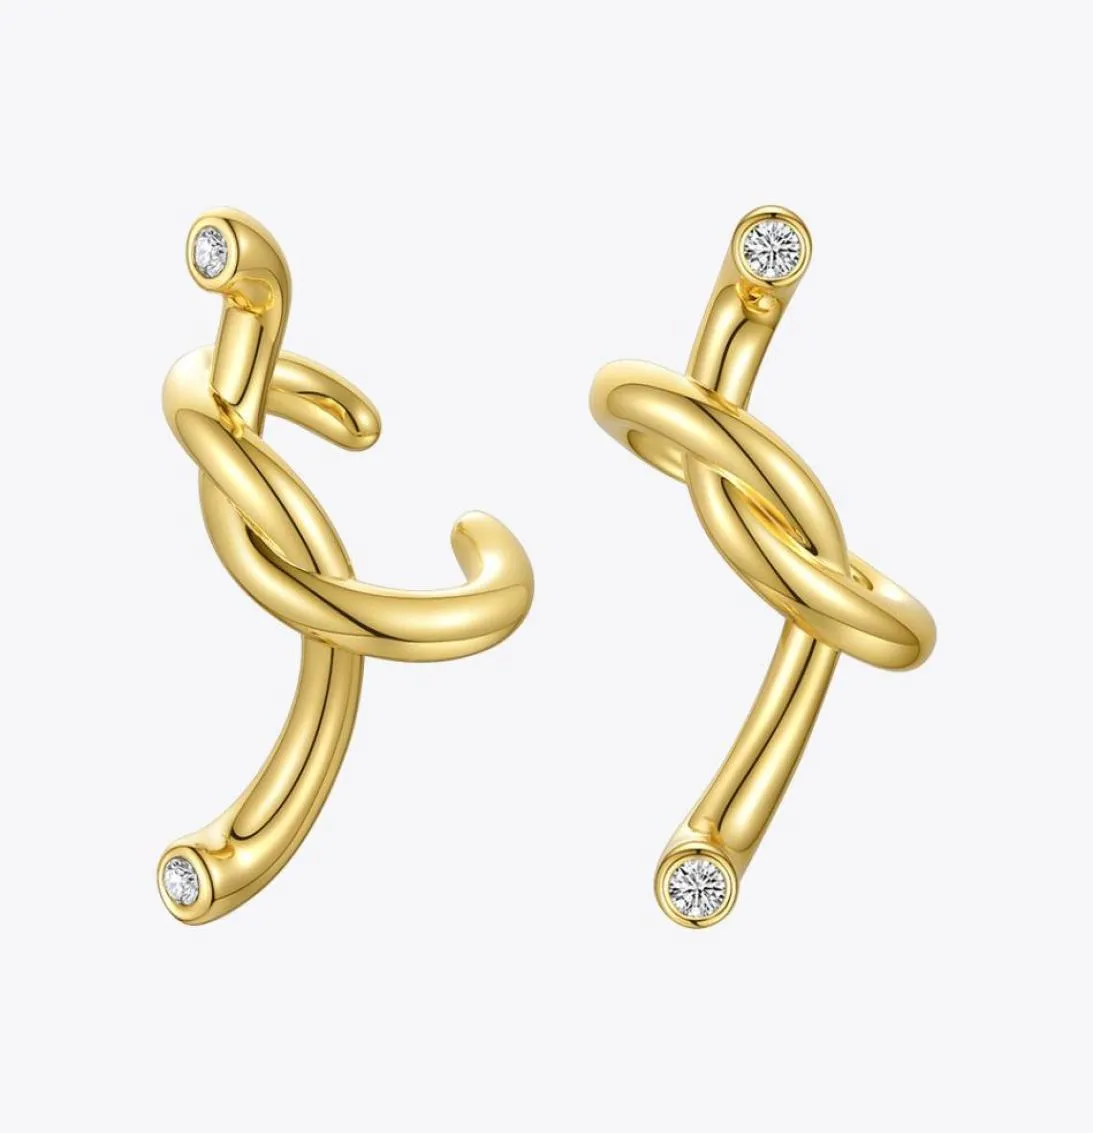 Stud ENFASHION Irregular Knot Crystal Earcuff Earings Without Piercing Gold Color Ear Cuff Clip On Earrings For Women E201197 22101282226